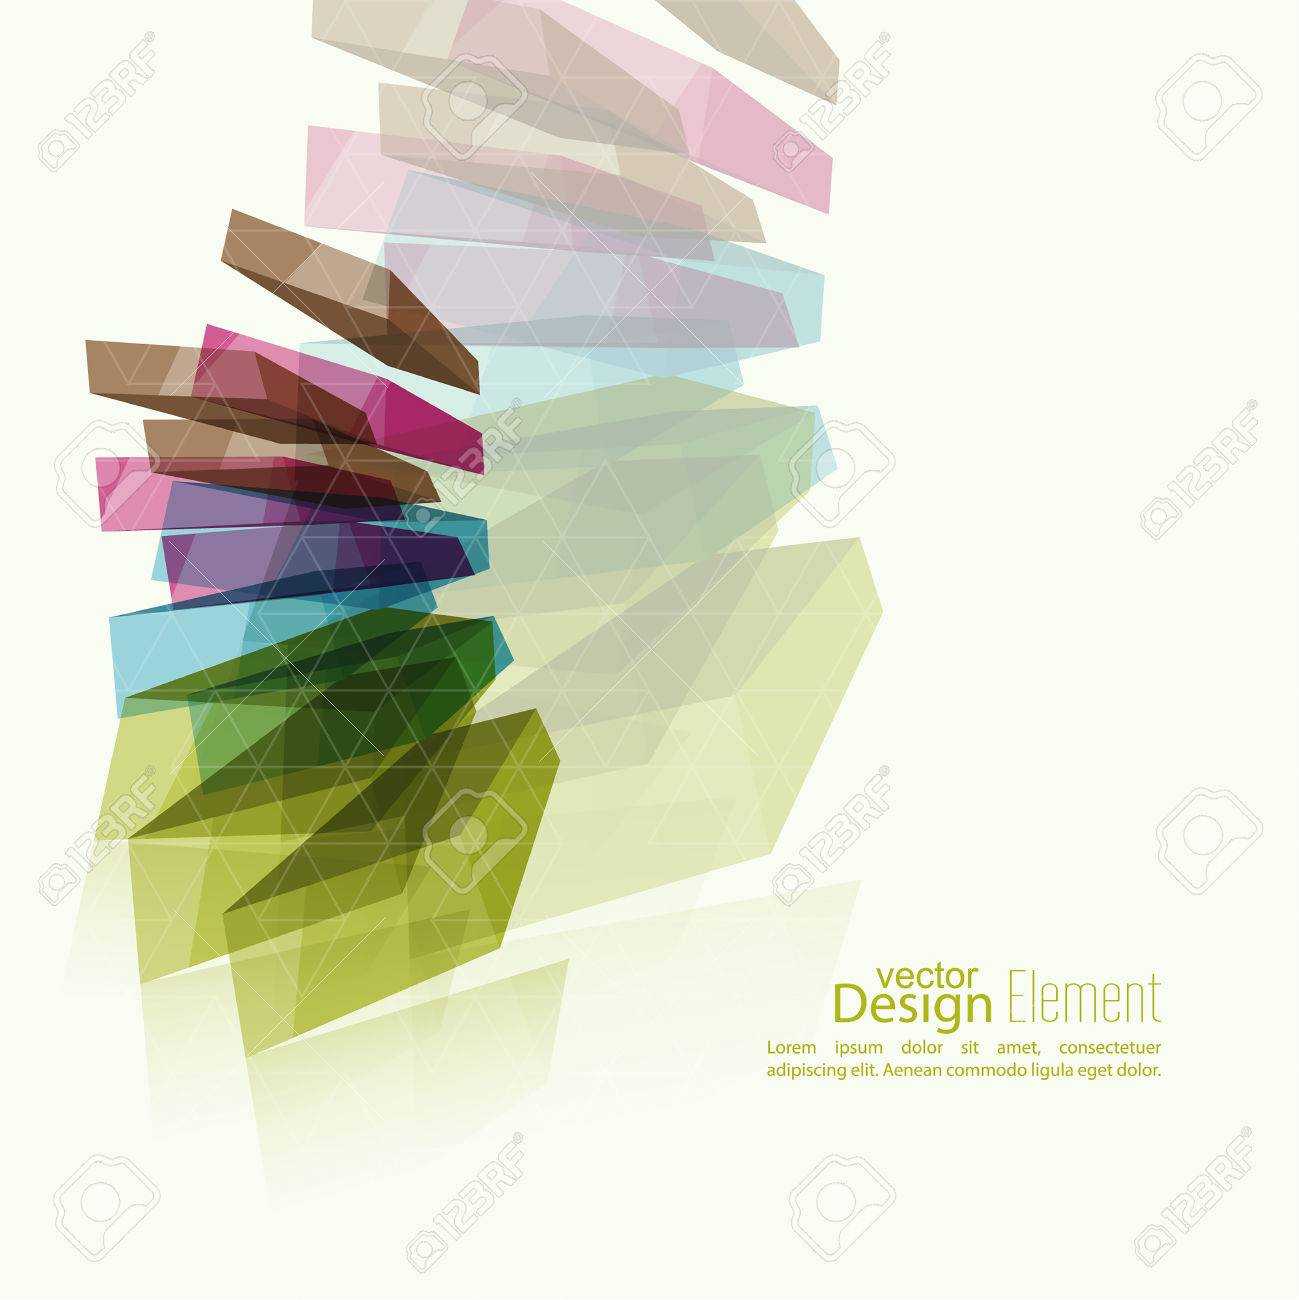 Abstract Background With Colored Crystals, Trellis Structure. For Cover  Book, Brochure, Flyer, Poster, Magazine, Booklet, Leaflet, Cd Cover Design, Regarding Mobile Book Report Template